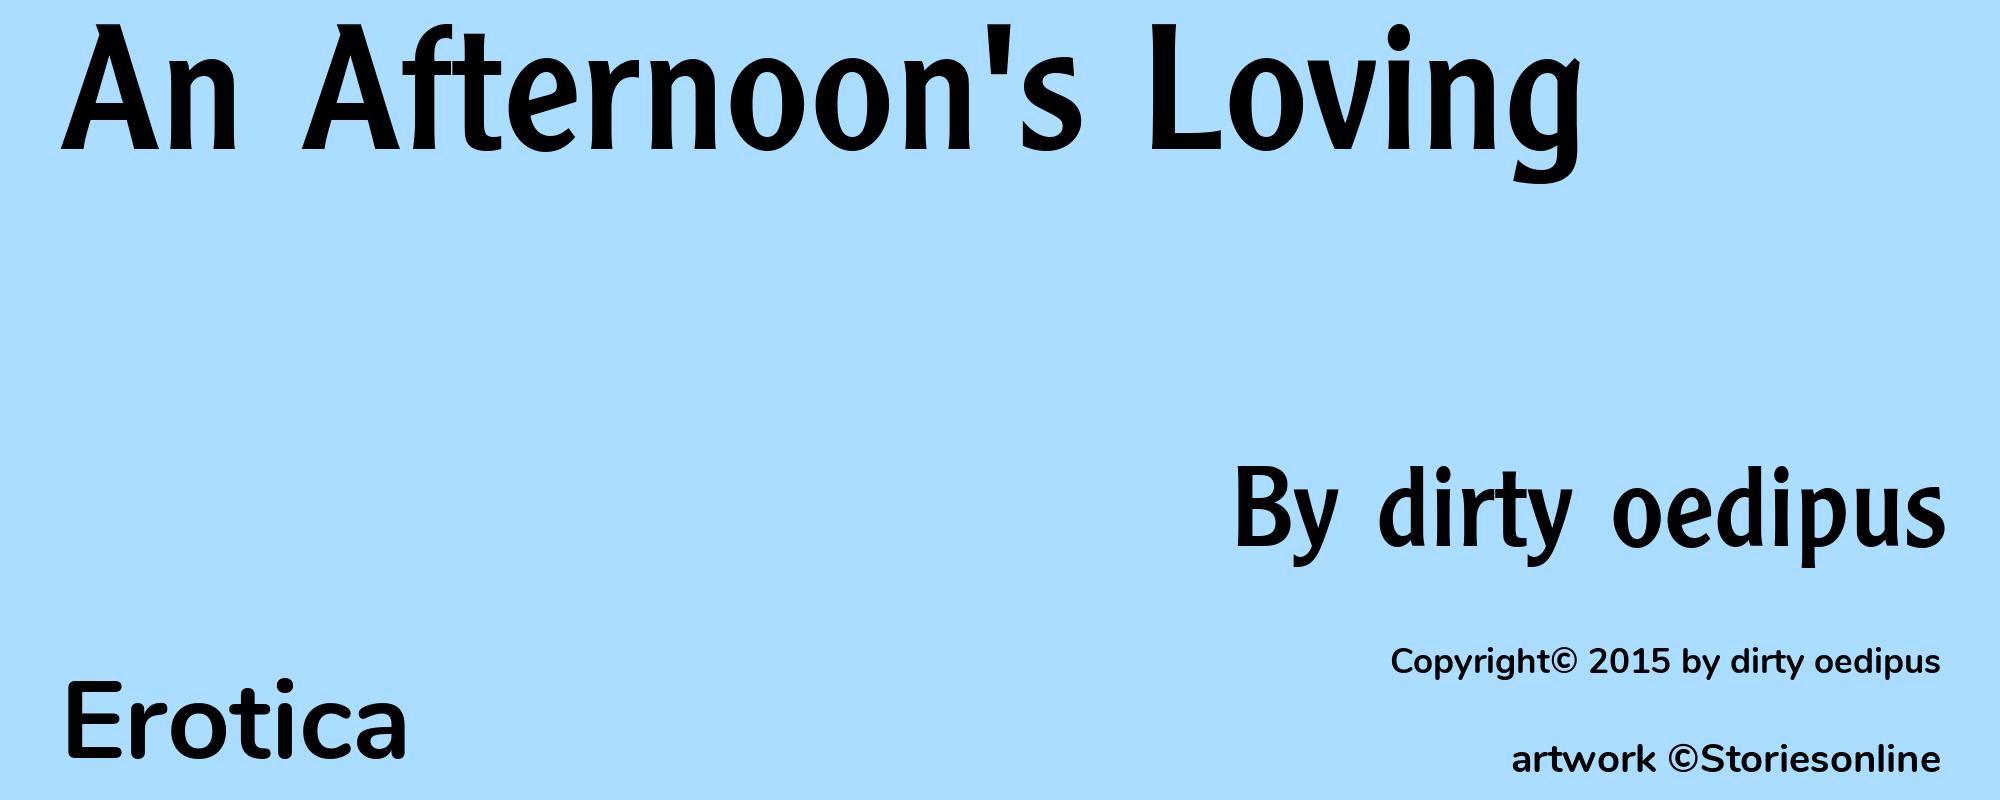 An Afternoon's Loving - Cover